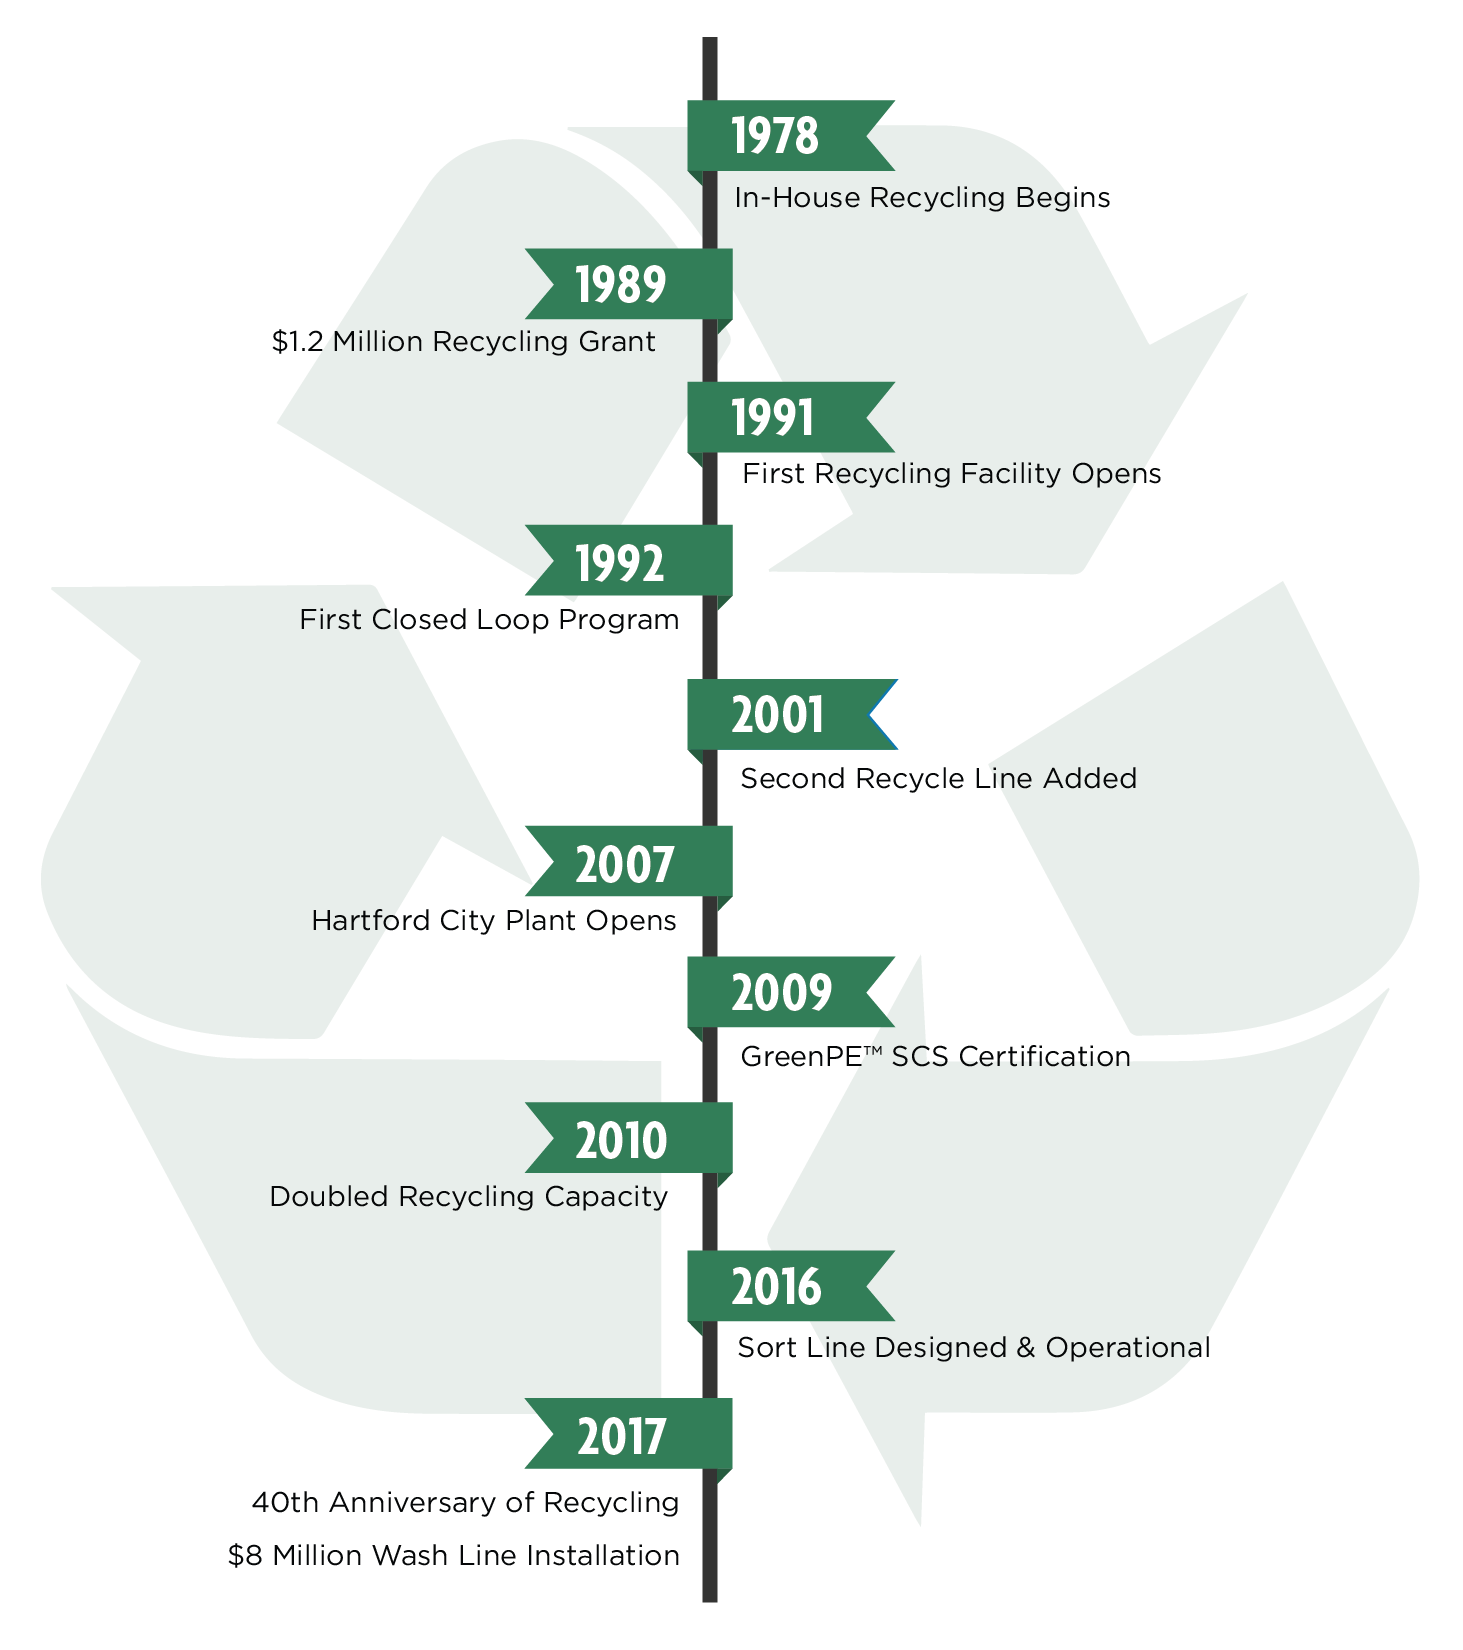 34 years of recycling evolution